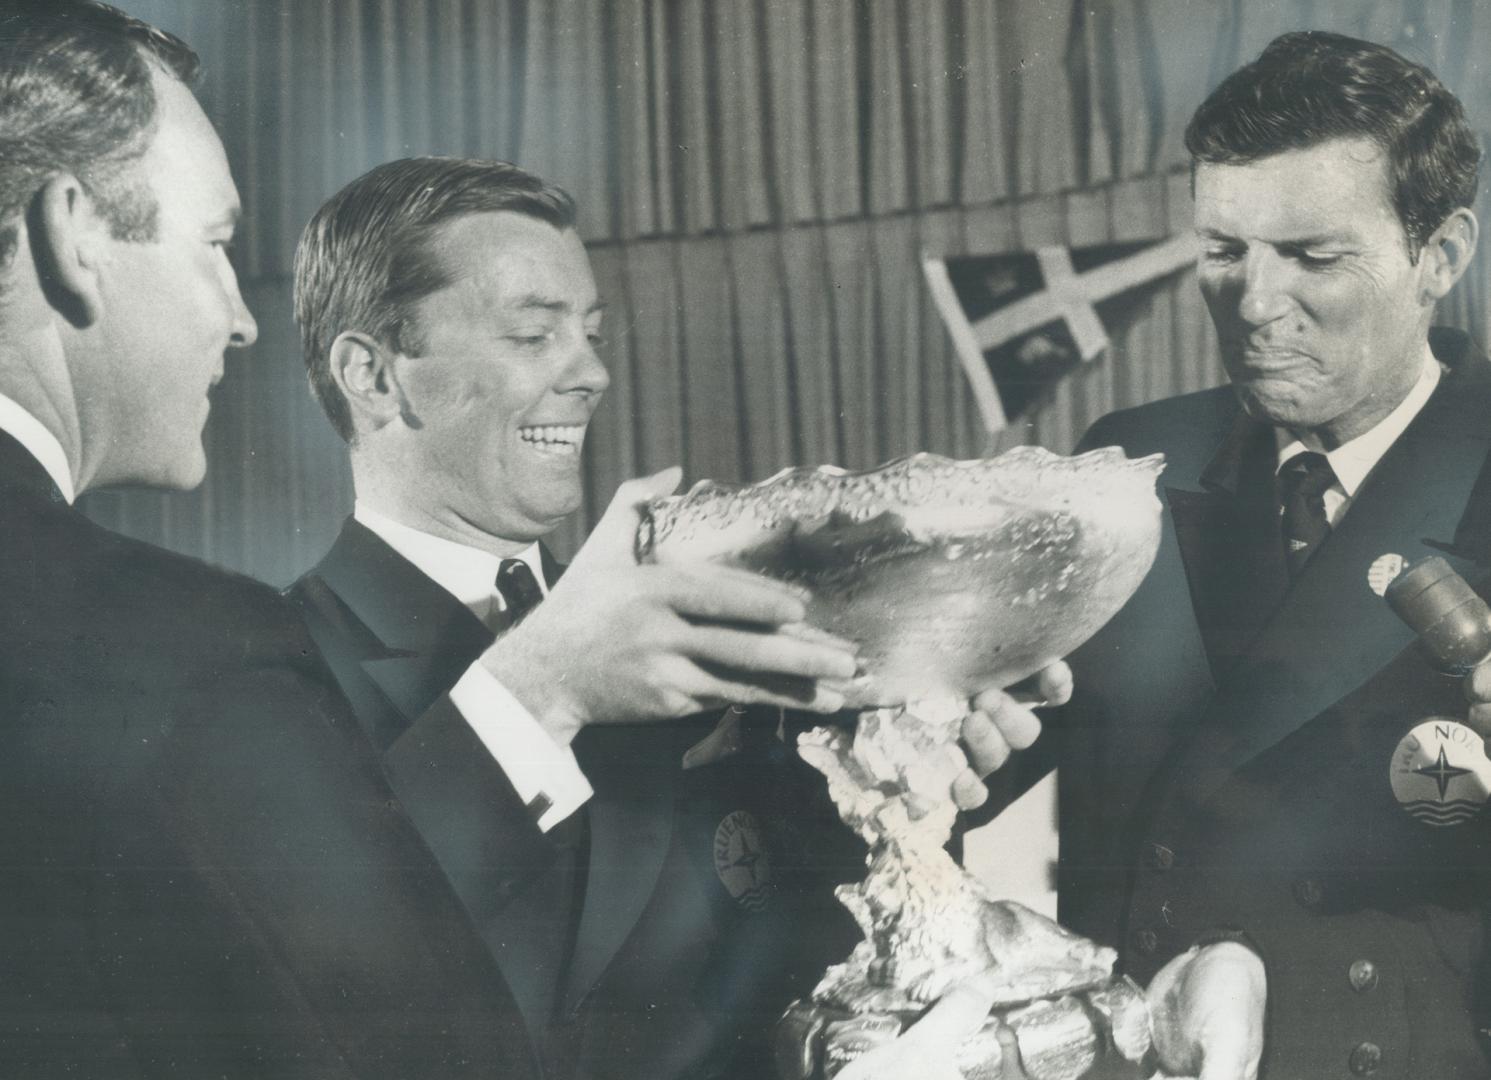 Perry Connolly taking drink from Canada's Cup during celebration at Royal Canadian Yacht Club, with Gord Fisher and Dave Osler